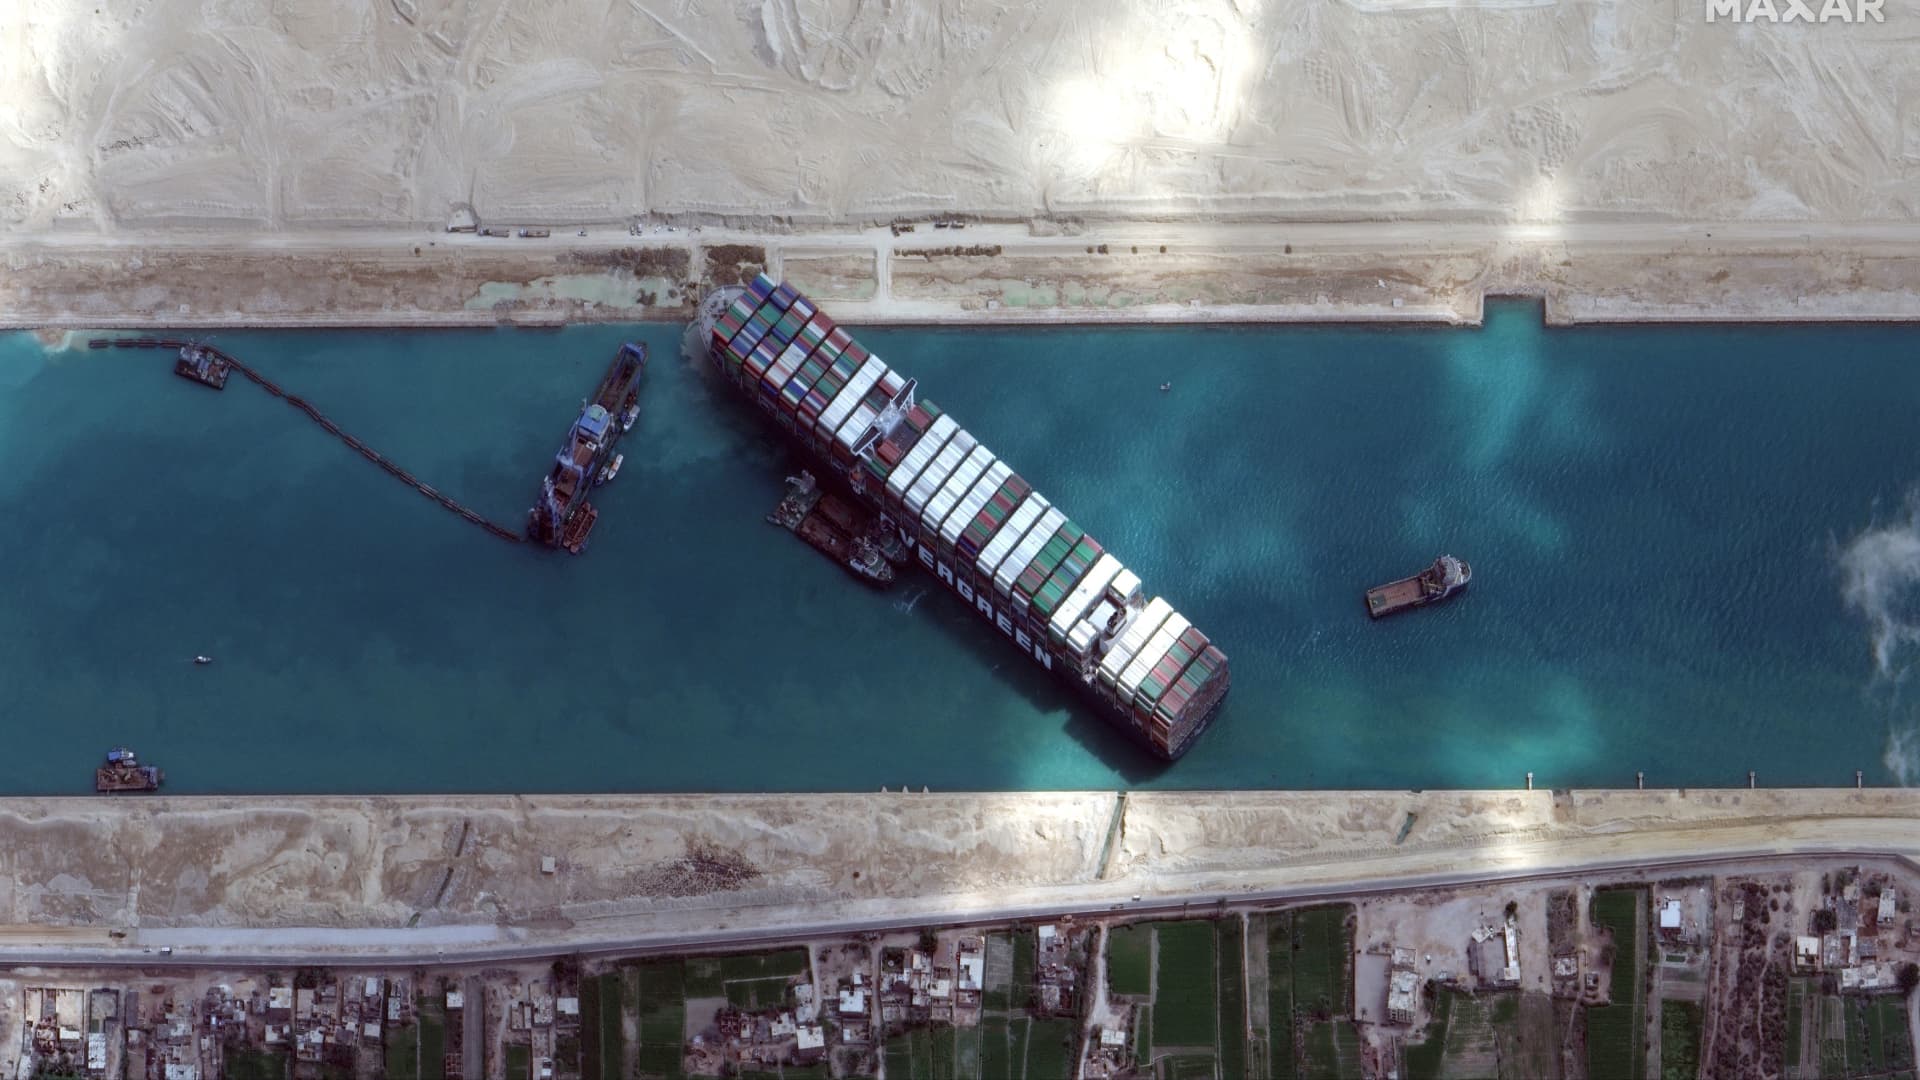 A view shows Ever Given container ship in Suez Canal in this Maxar Technologies satellite image taken on March 28, 2021.